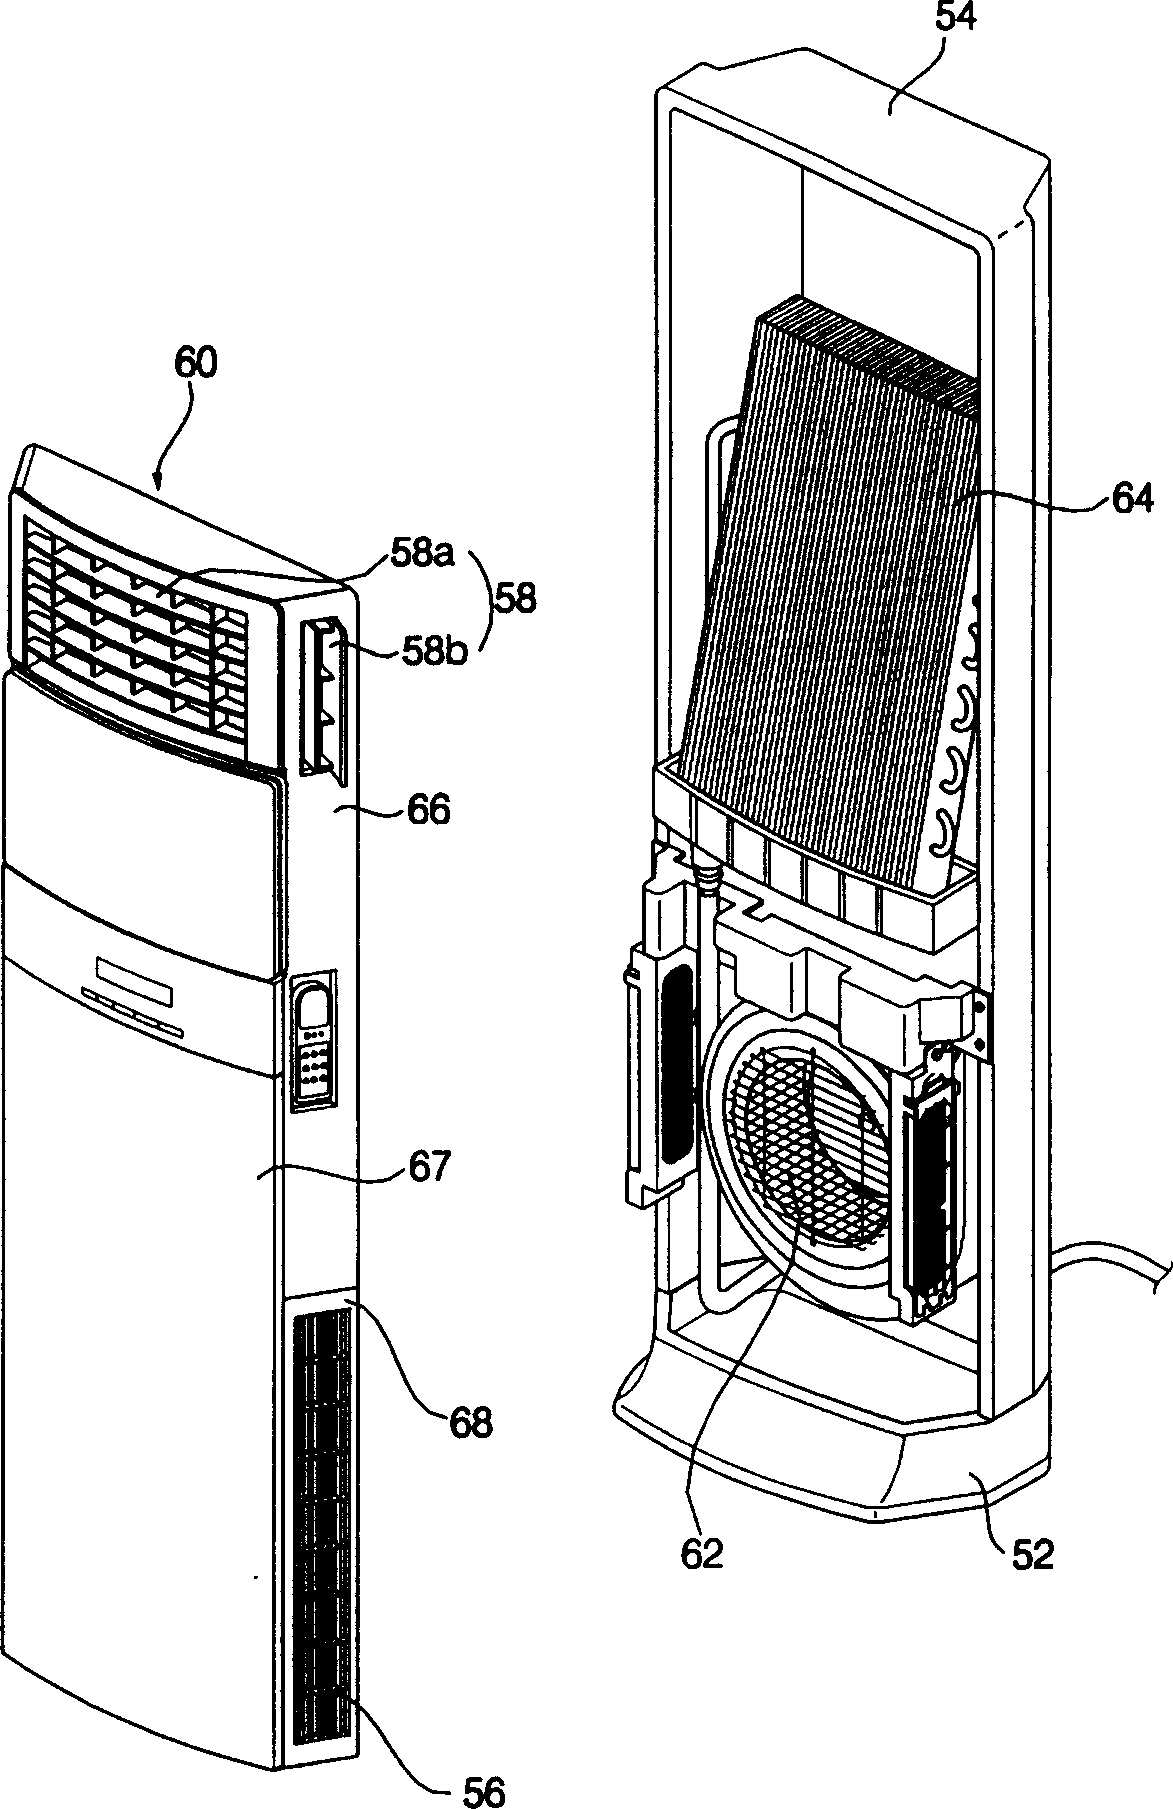 Method for controlling fan electromotor of air conditioner